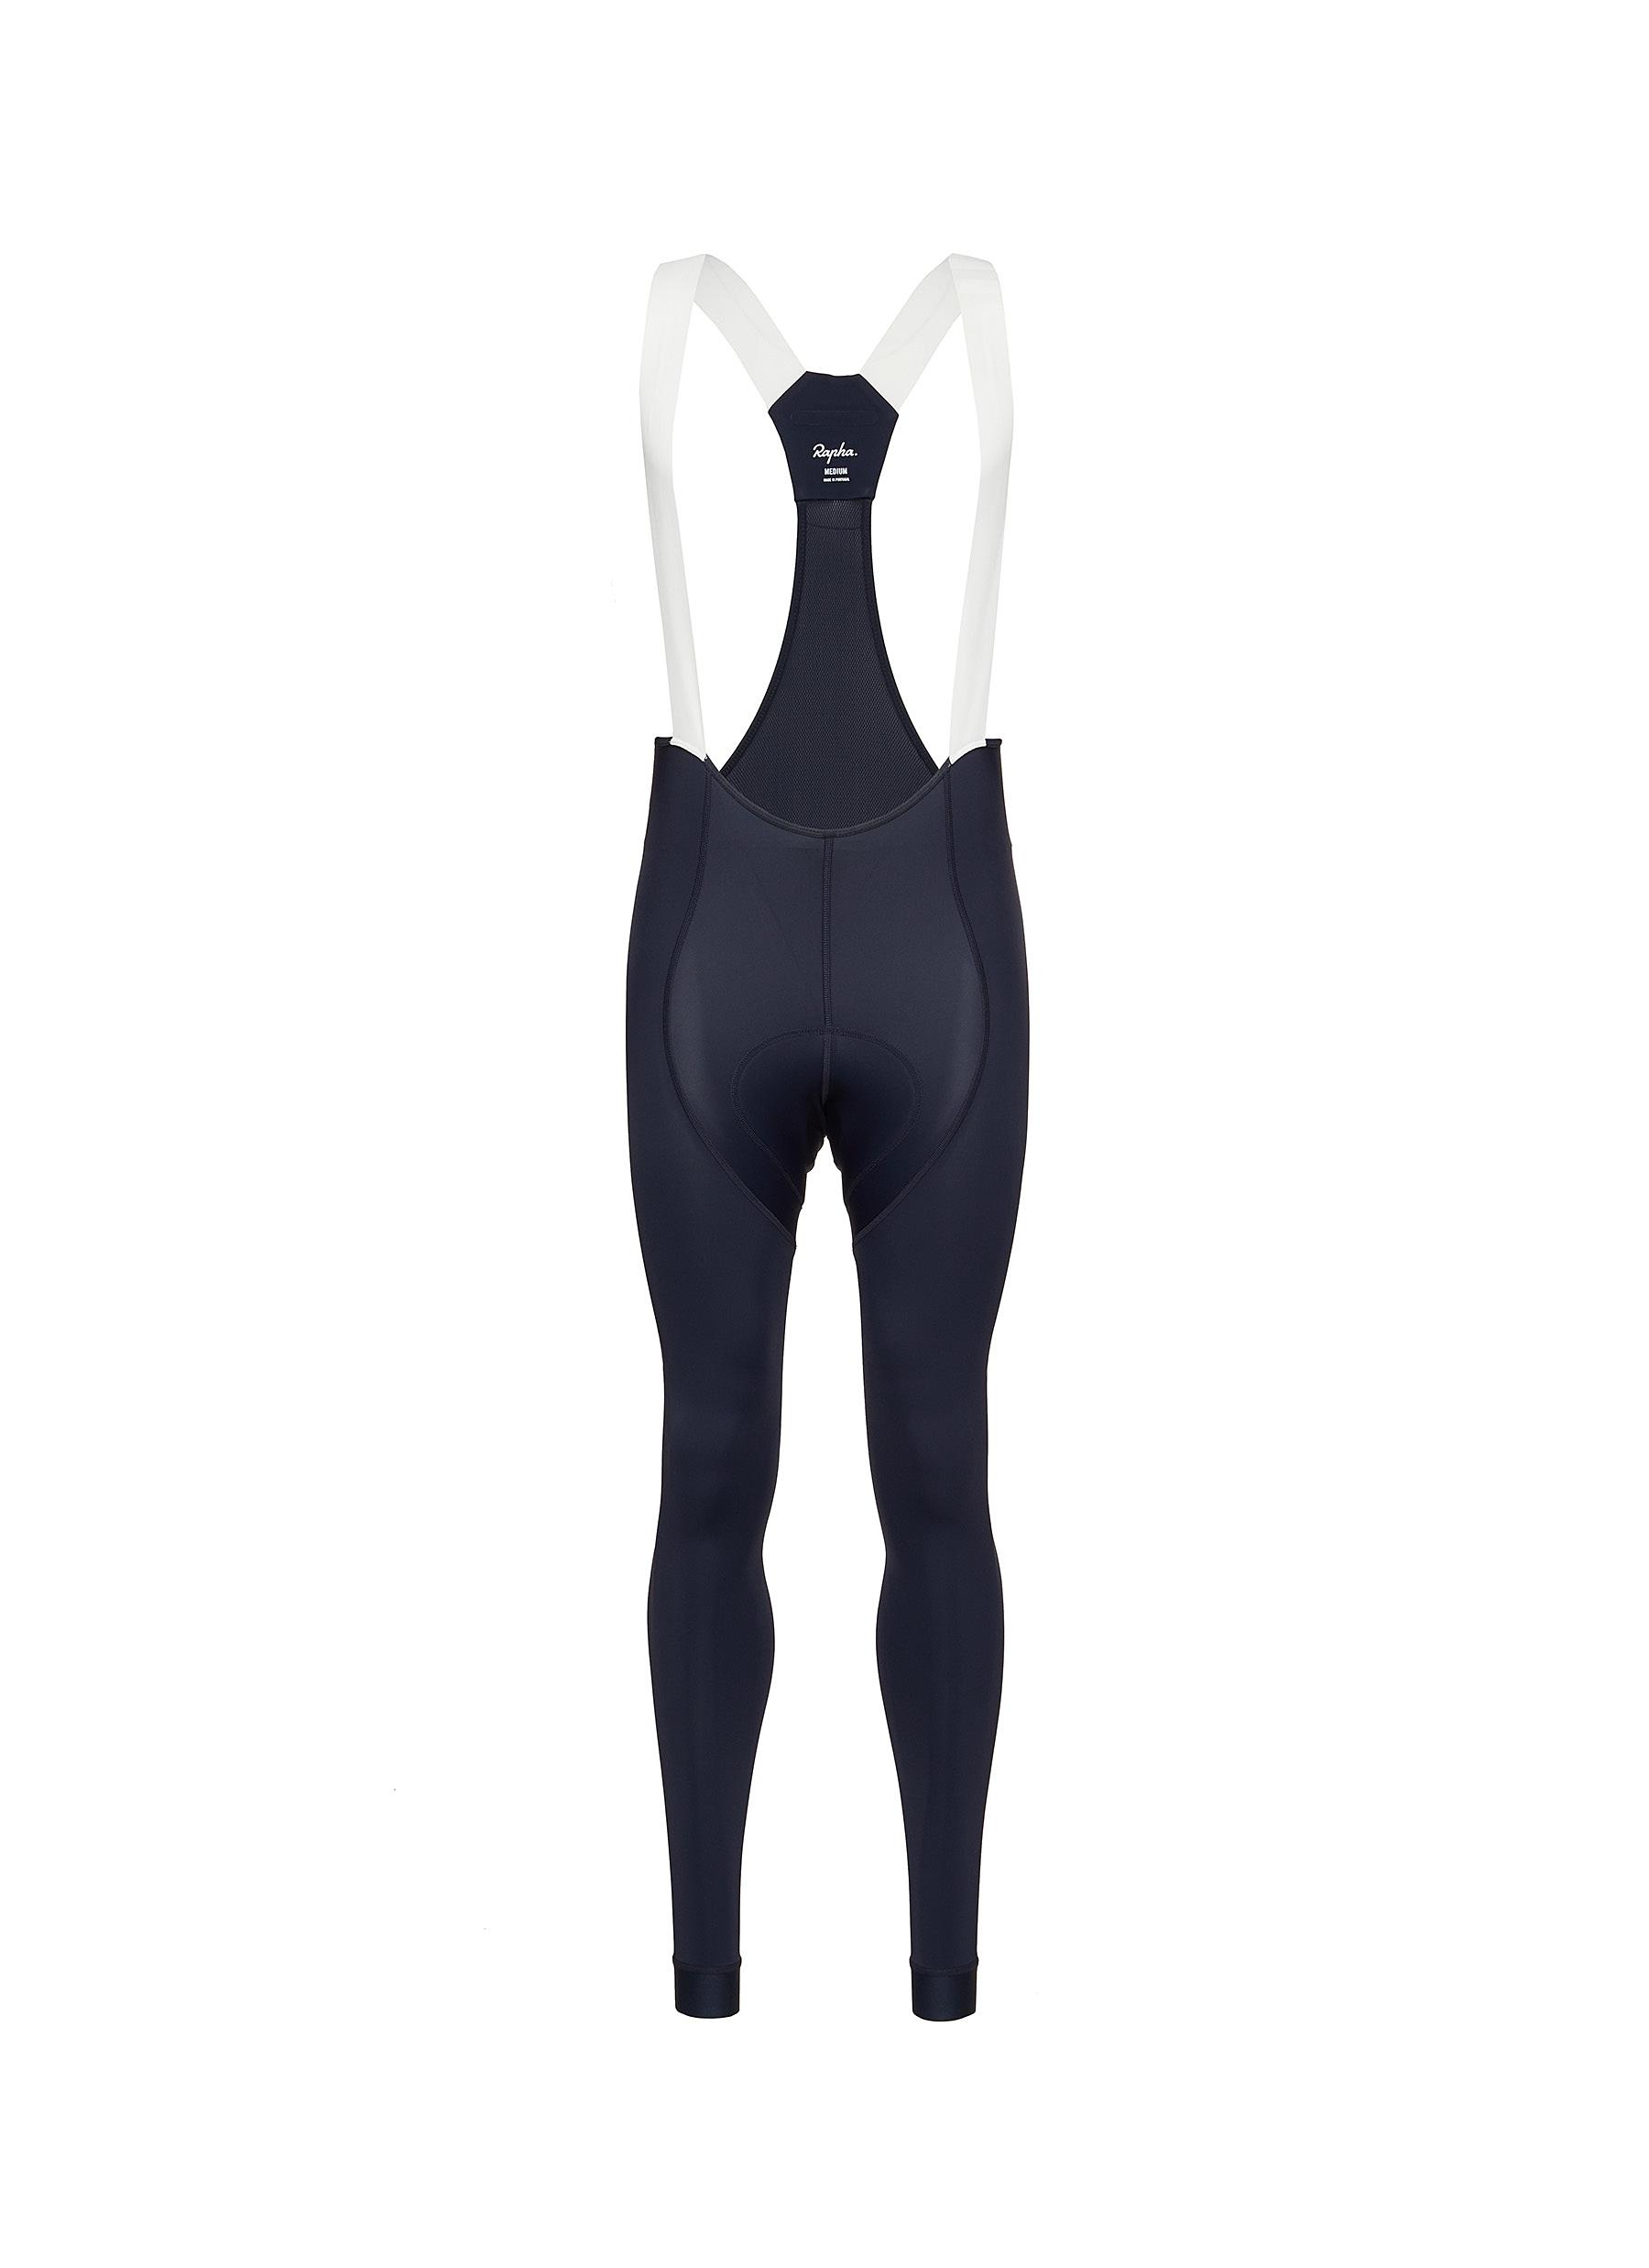 Pro Team Training Tights With Pad